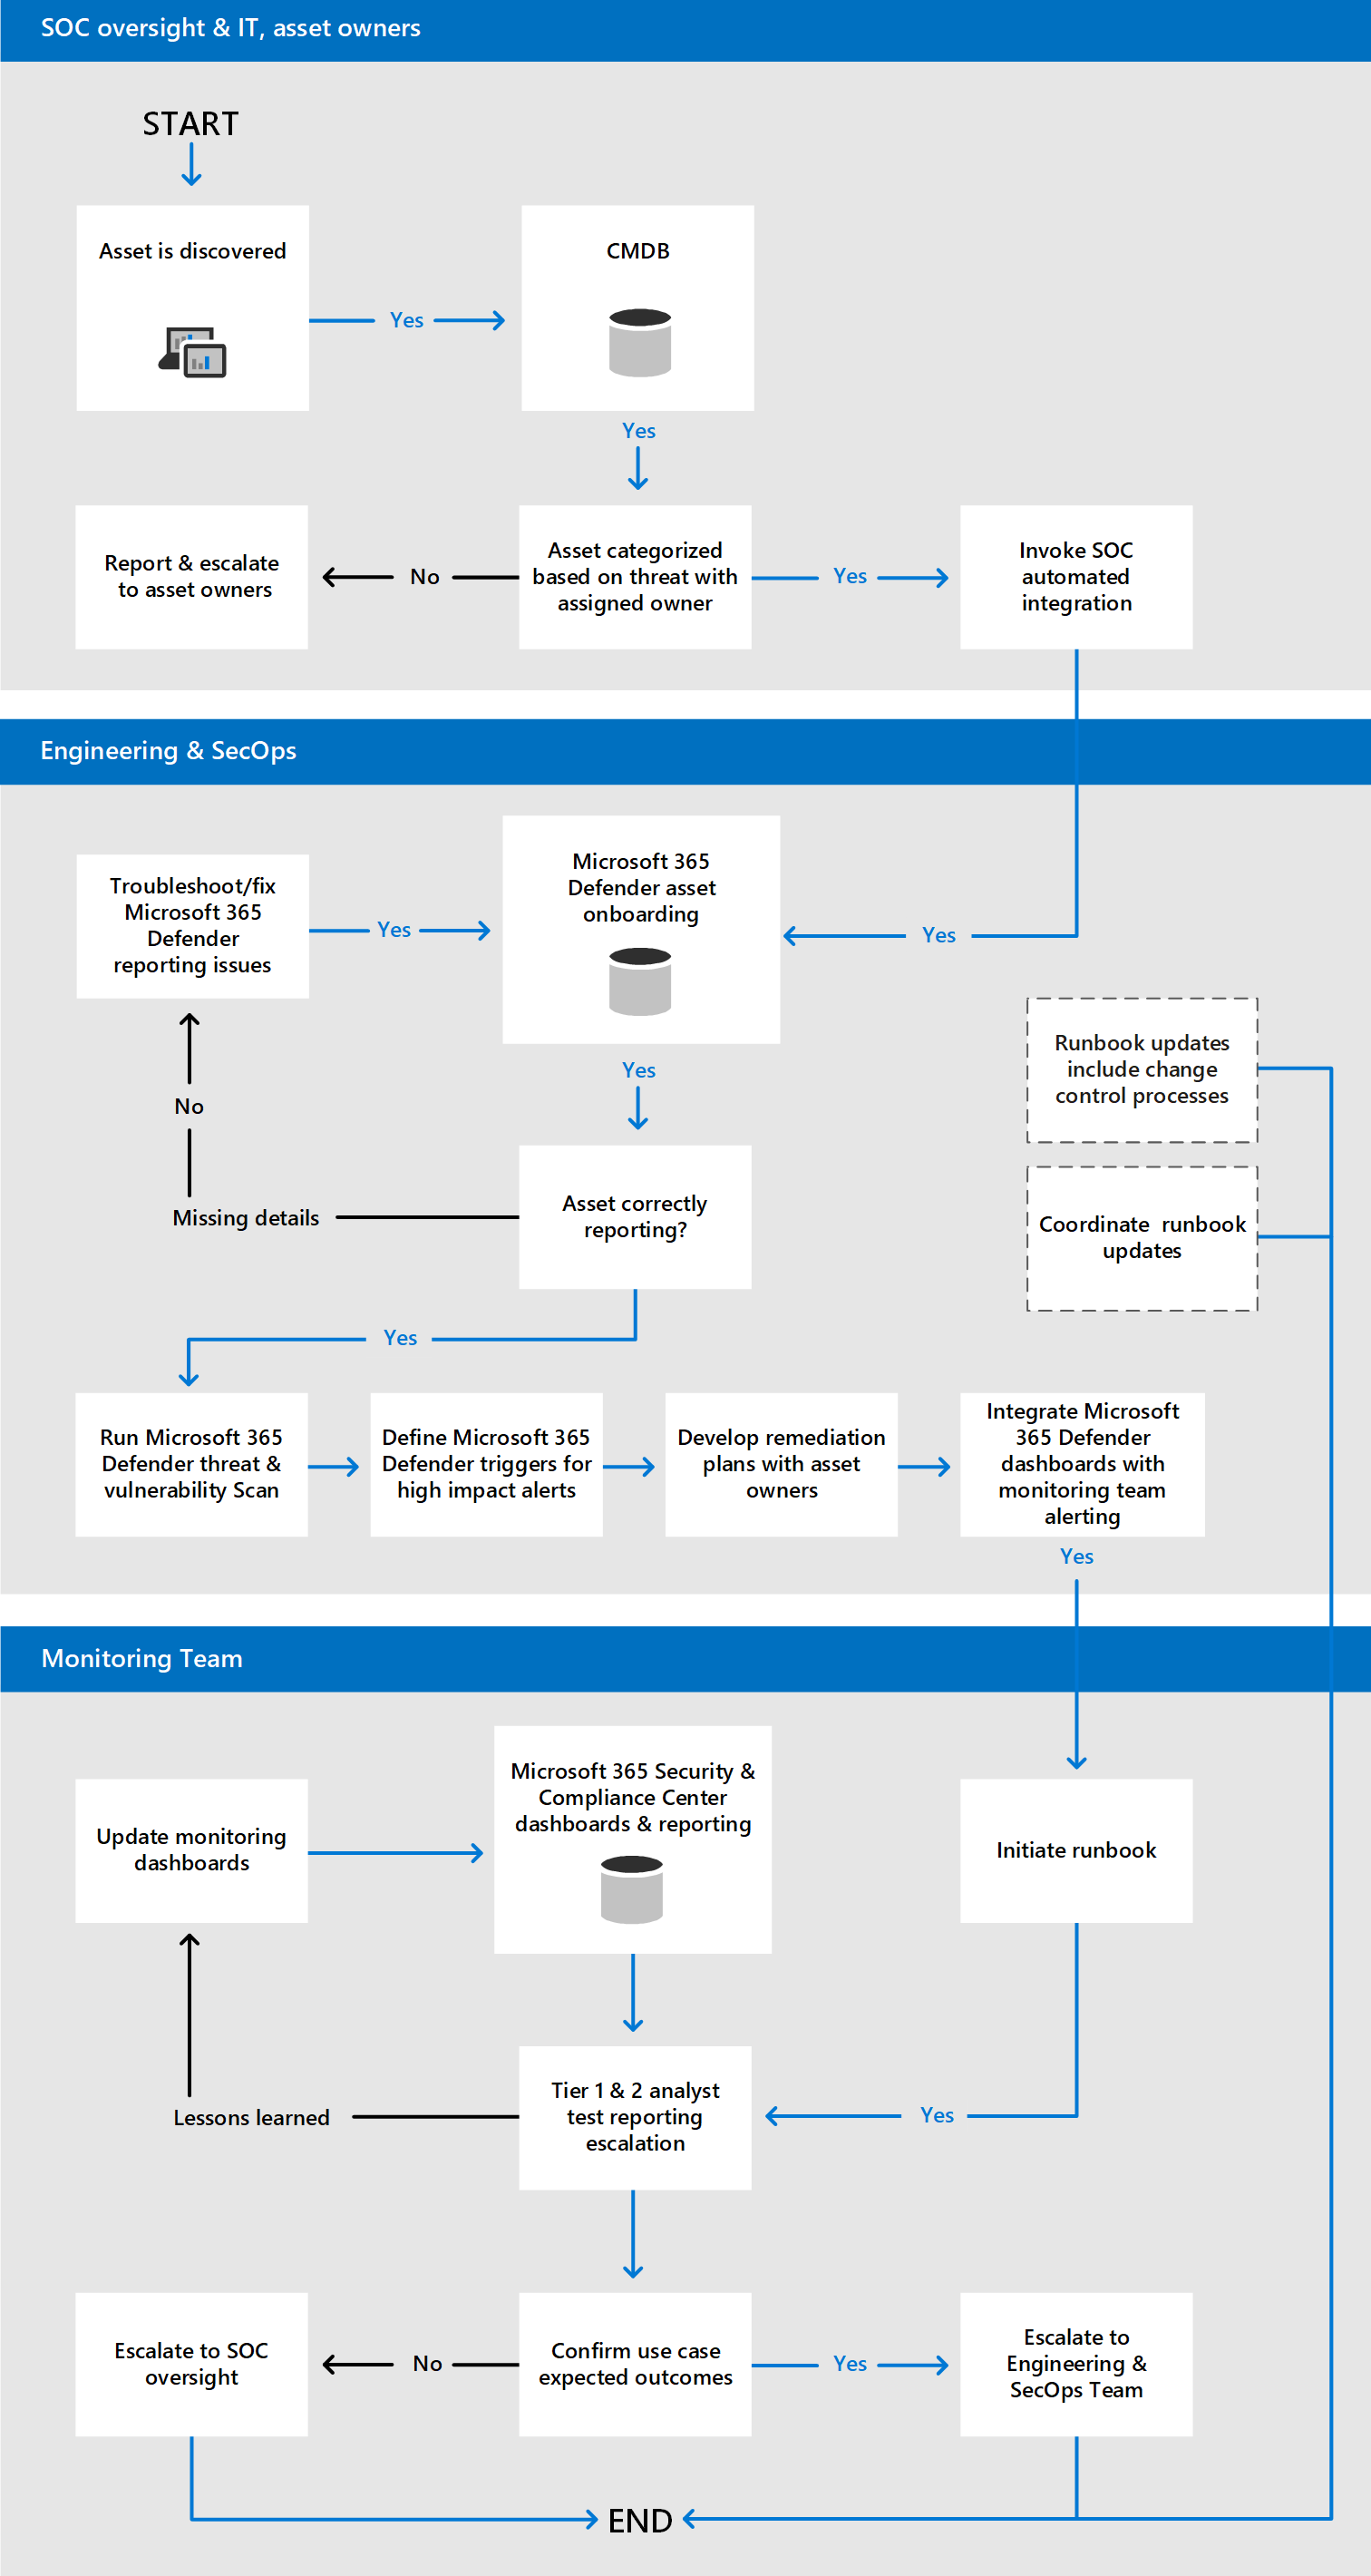 An example of a detailed use case workflow for threat and vulnerability management.